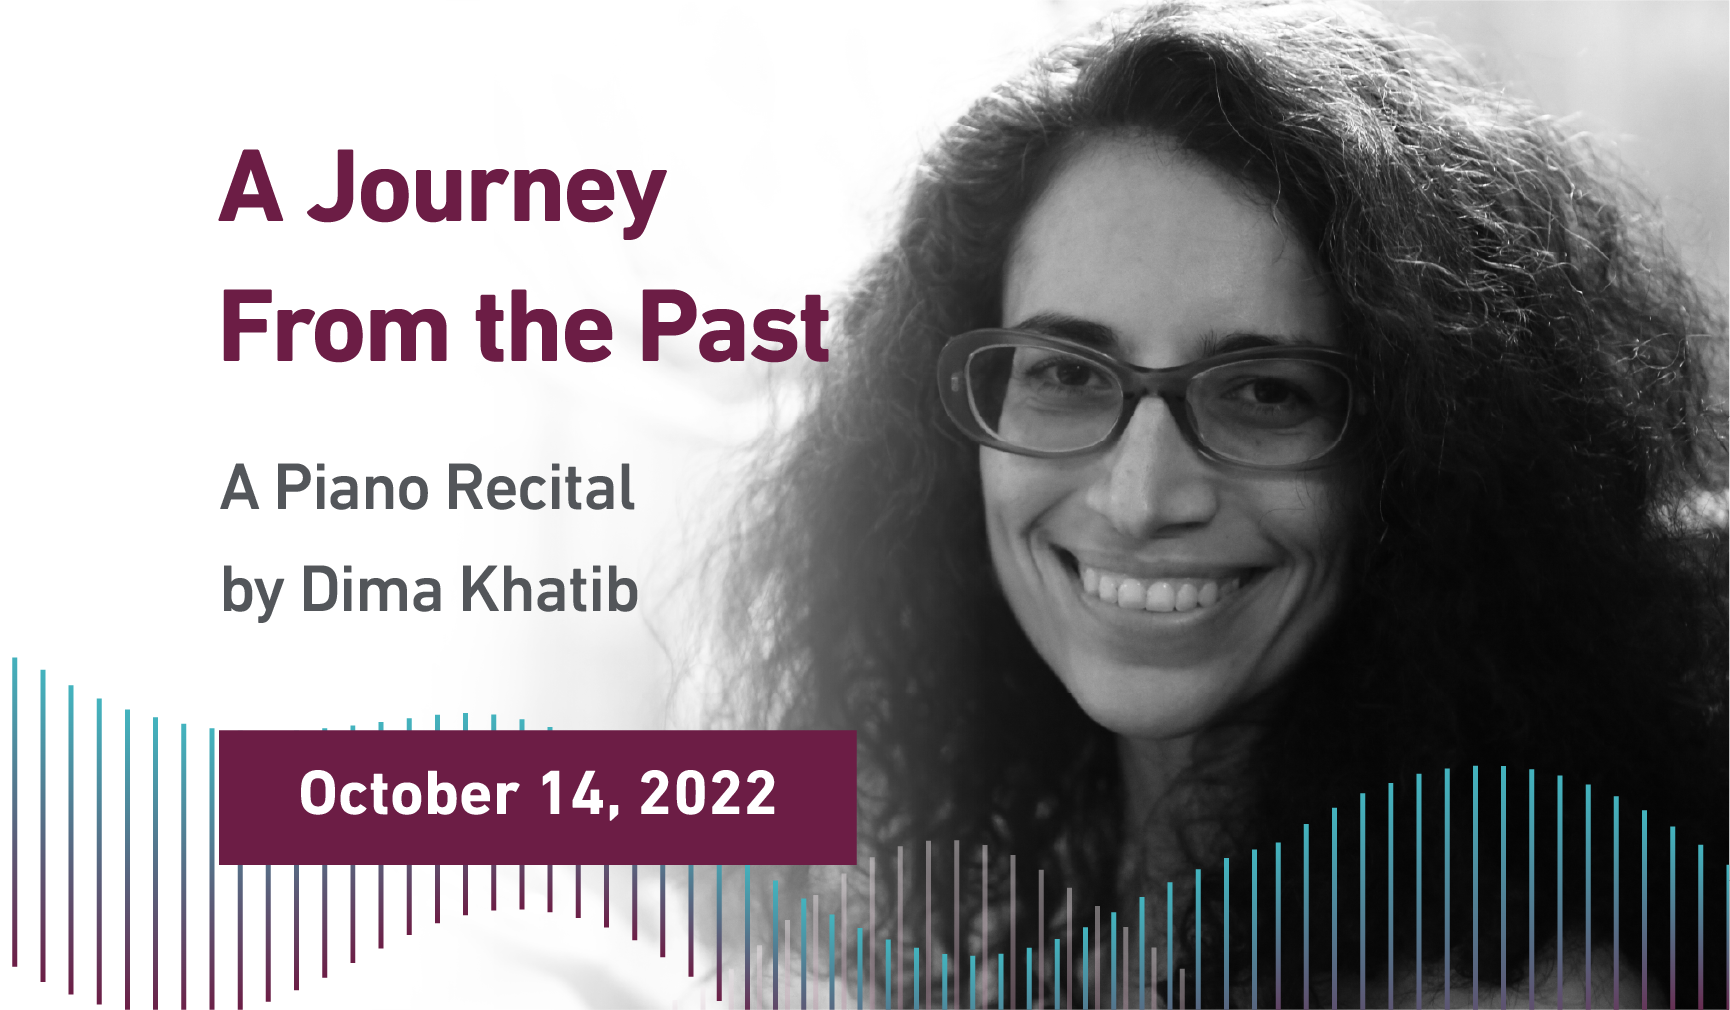 Banner reads: A journey from the past, a piano recital by Dima Khatib - October 14, 2022